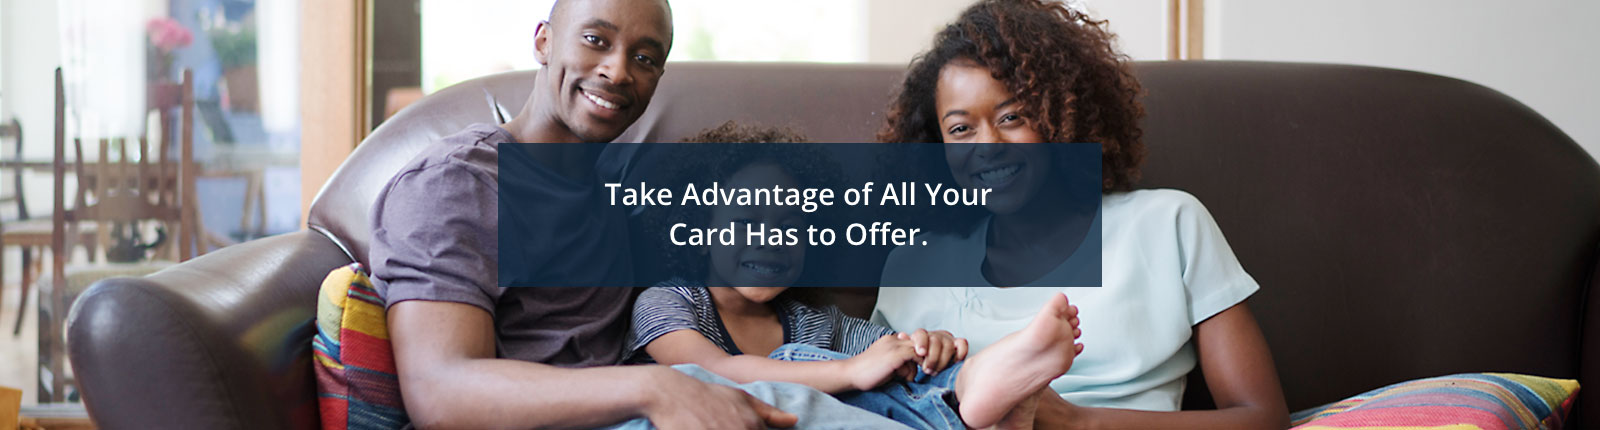 Take Advantage of All Your Card Has to Offer